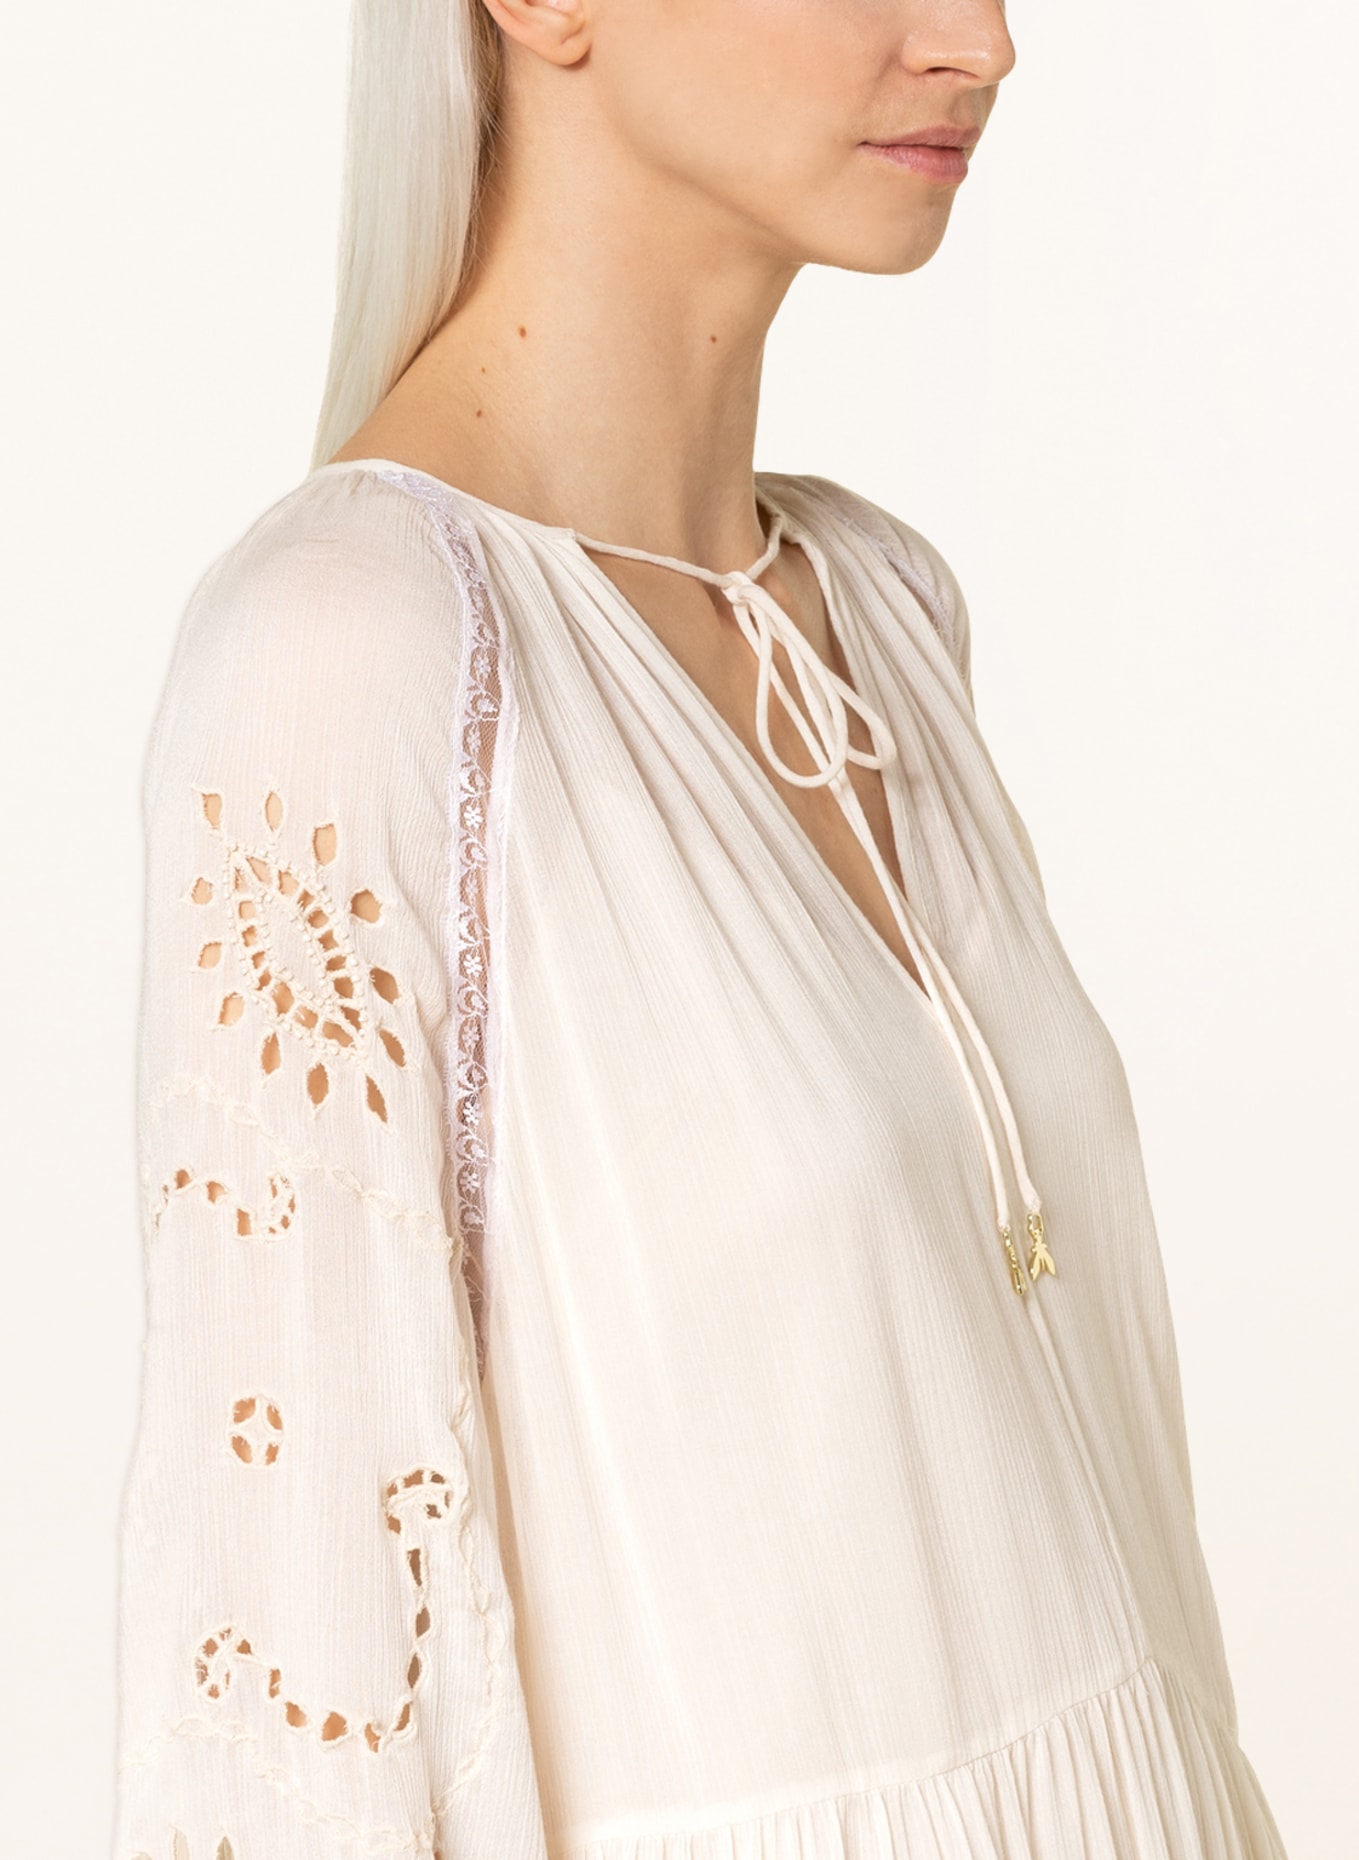 PATRIZIA PEPE Dress with decorative beads and lace , Color: CREAM (Image 4)